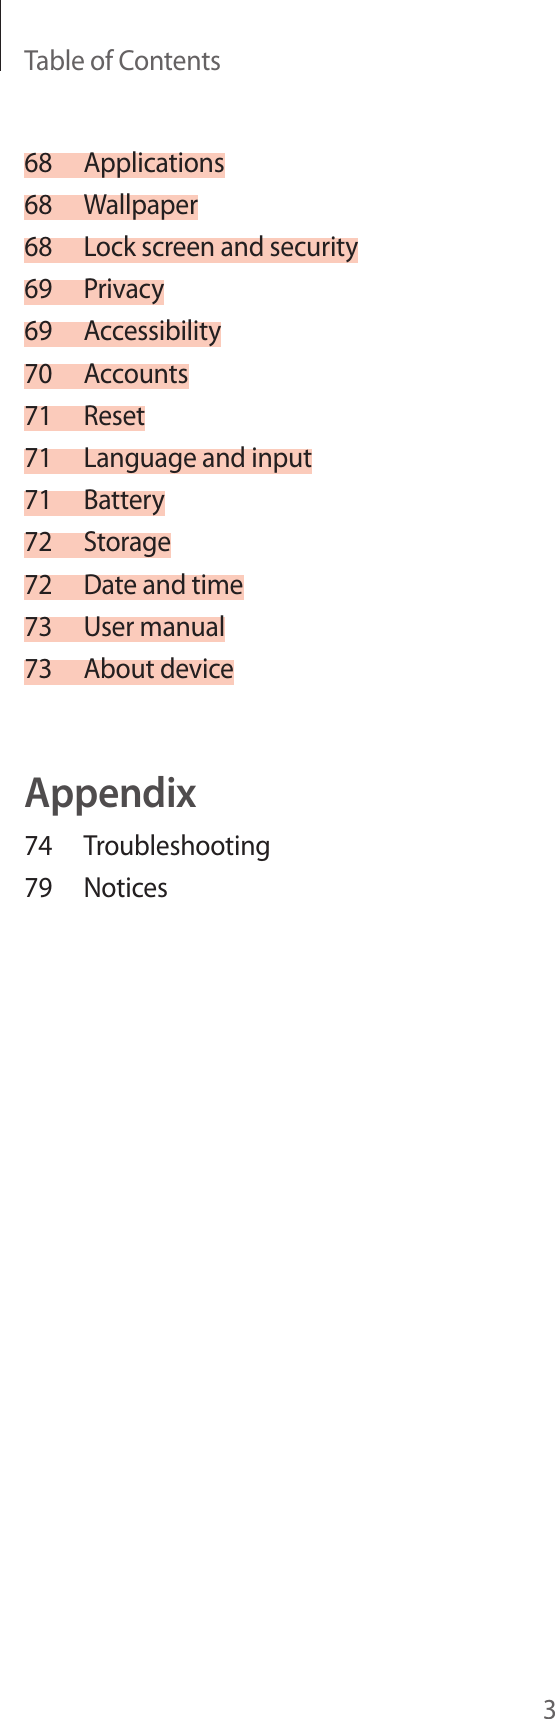 Table of Contents368 Applications68 Wallpaper68  Lock screen and security69 Privacy69 Accessibility70 Accounts71 Reset71  Language and input71 Battery72 Storage72  Date and time73  User manual73  About deviceAppendix74 Troubleshooting79 Notices